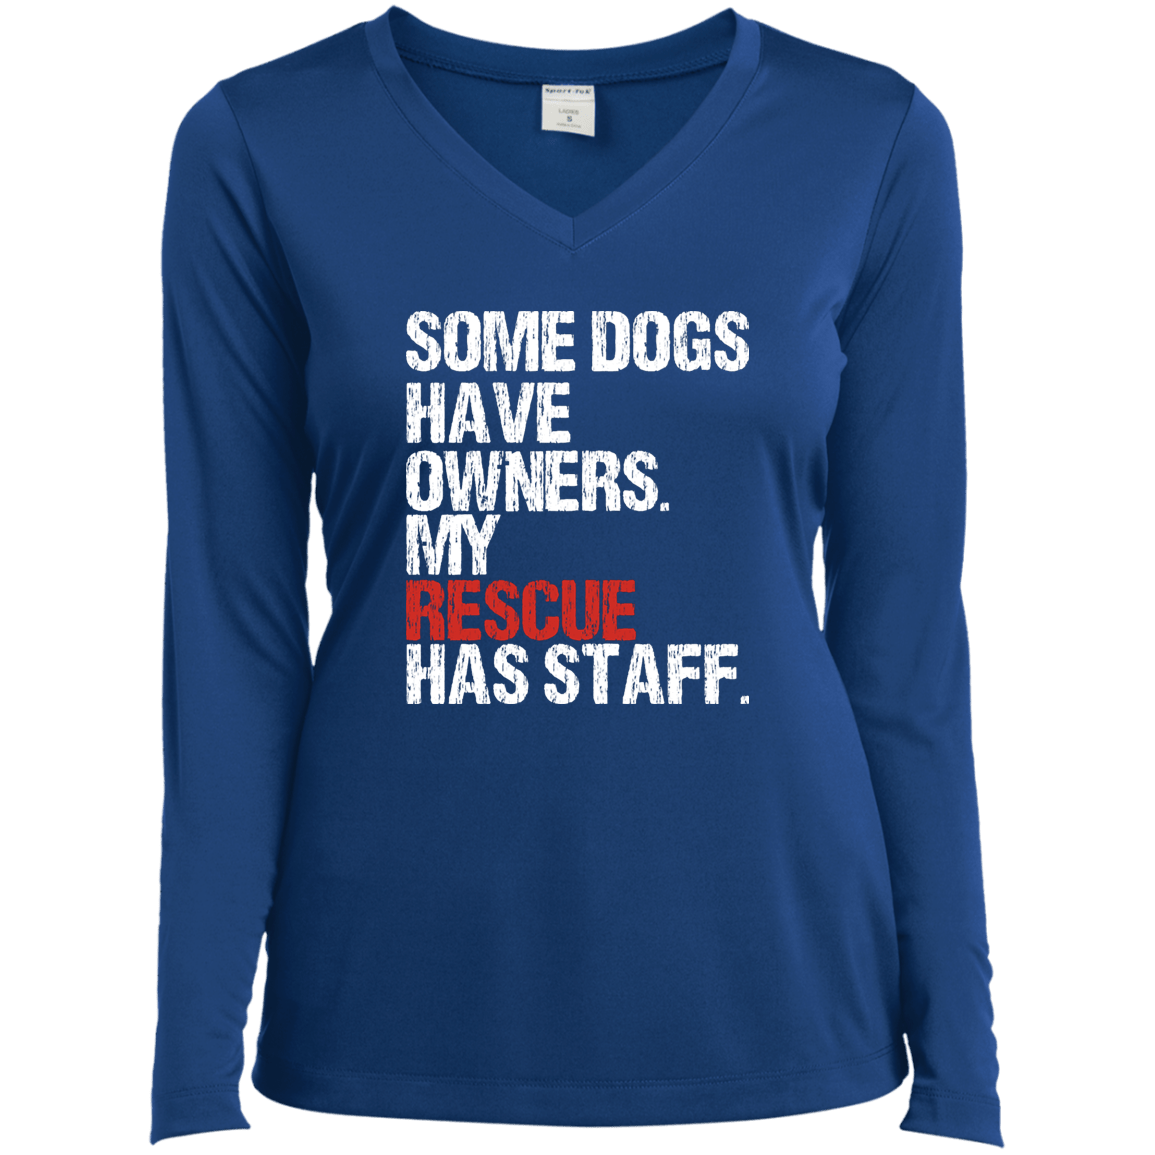 Some Dogs Have Owners - Long Sleeve Ladies V Neck.